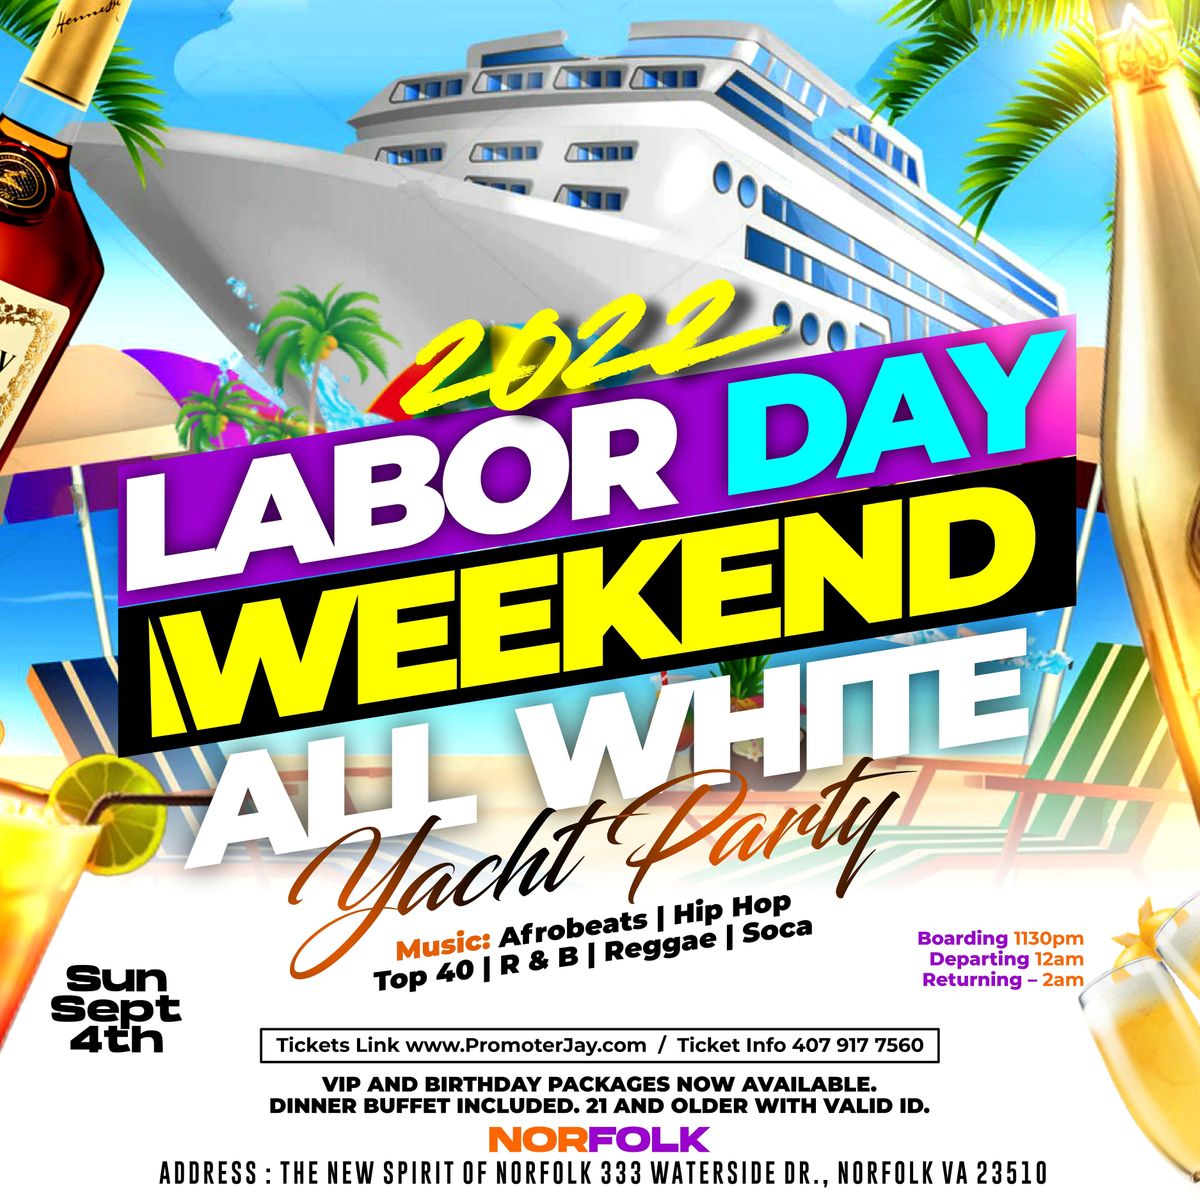 2022 Labor Day Weekend All White Yacht Party Norfolk, The Spirit of